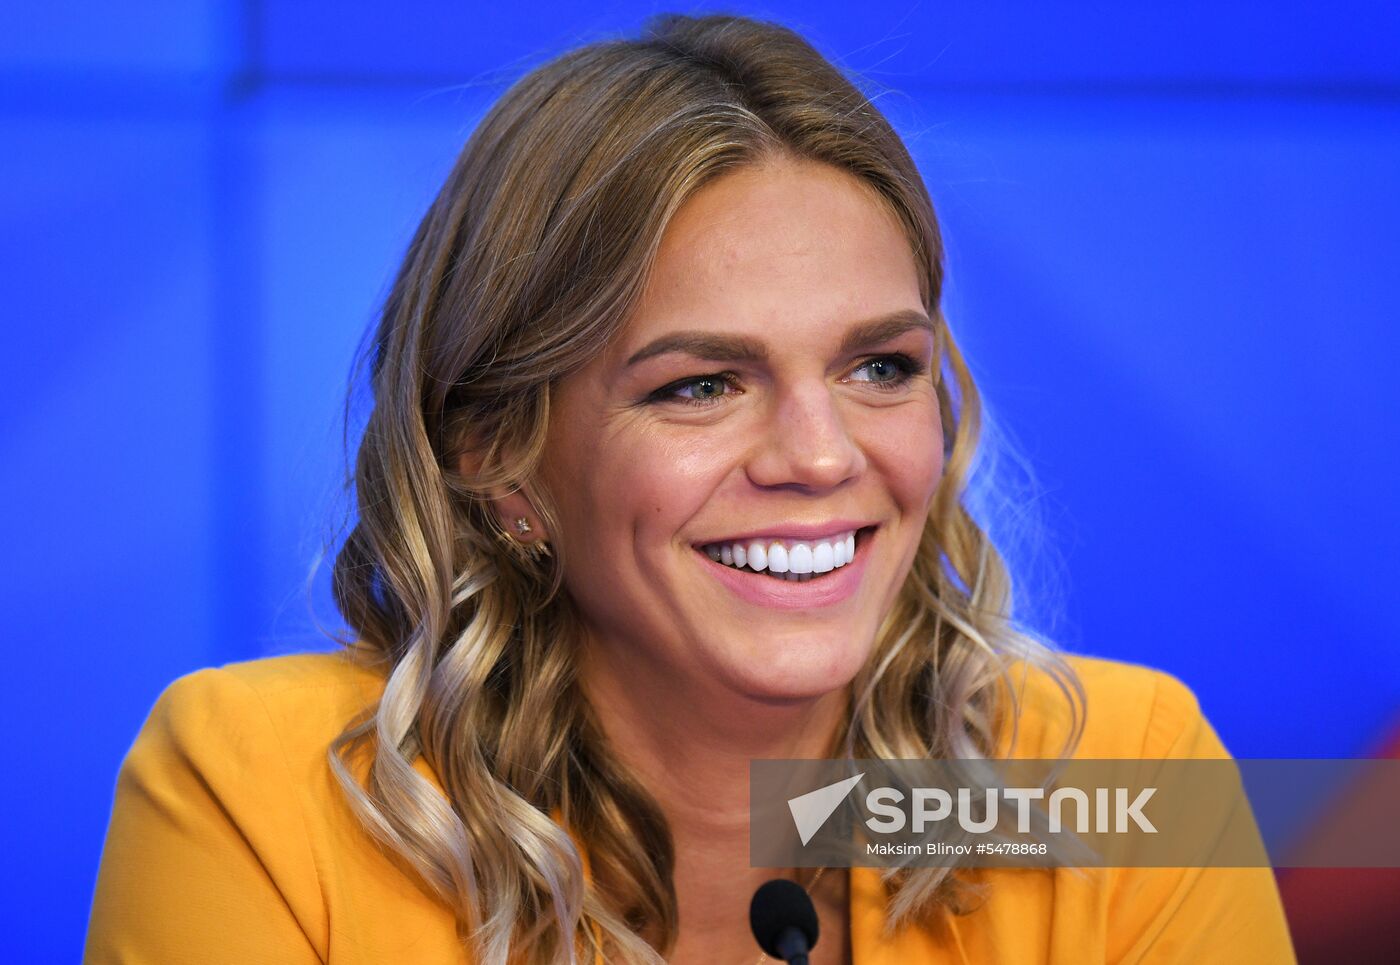 News conference with three-time Olympic swimming medalist Yulia Yefimova